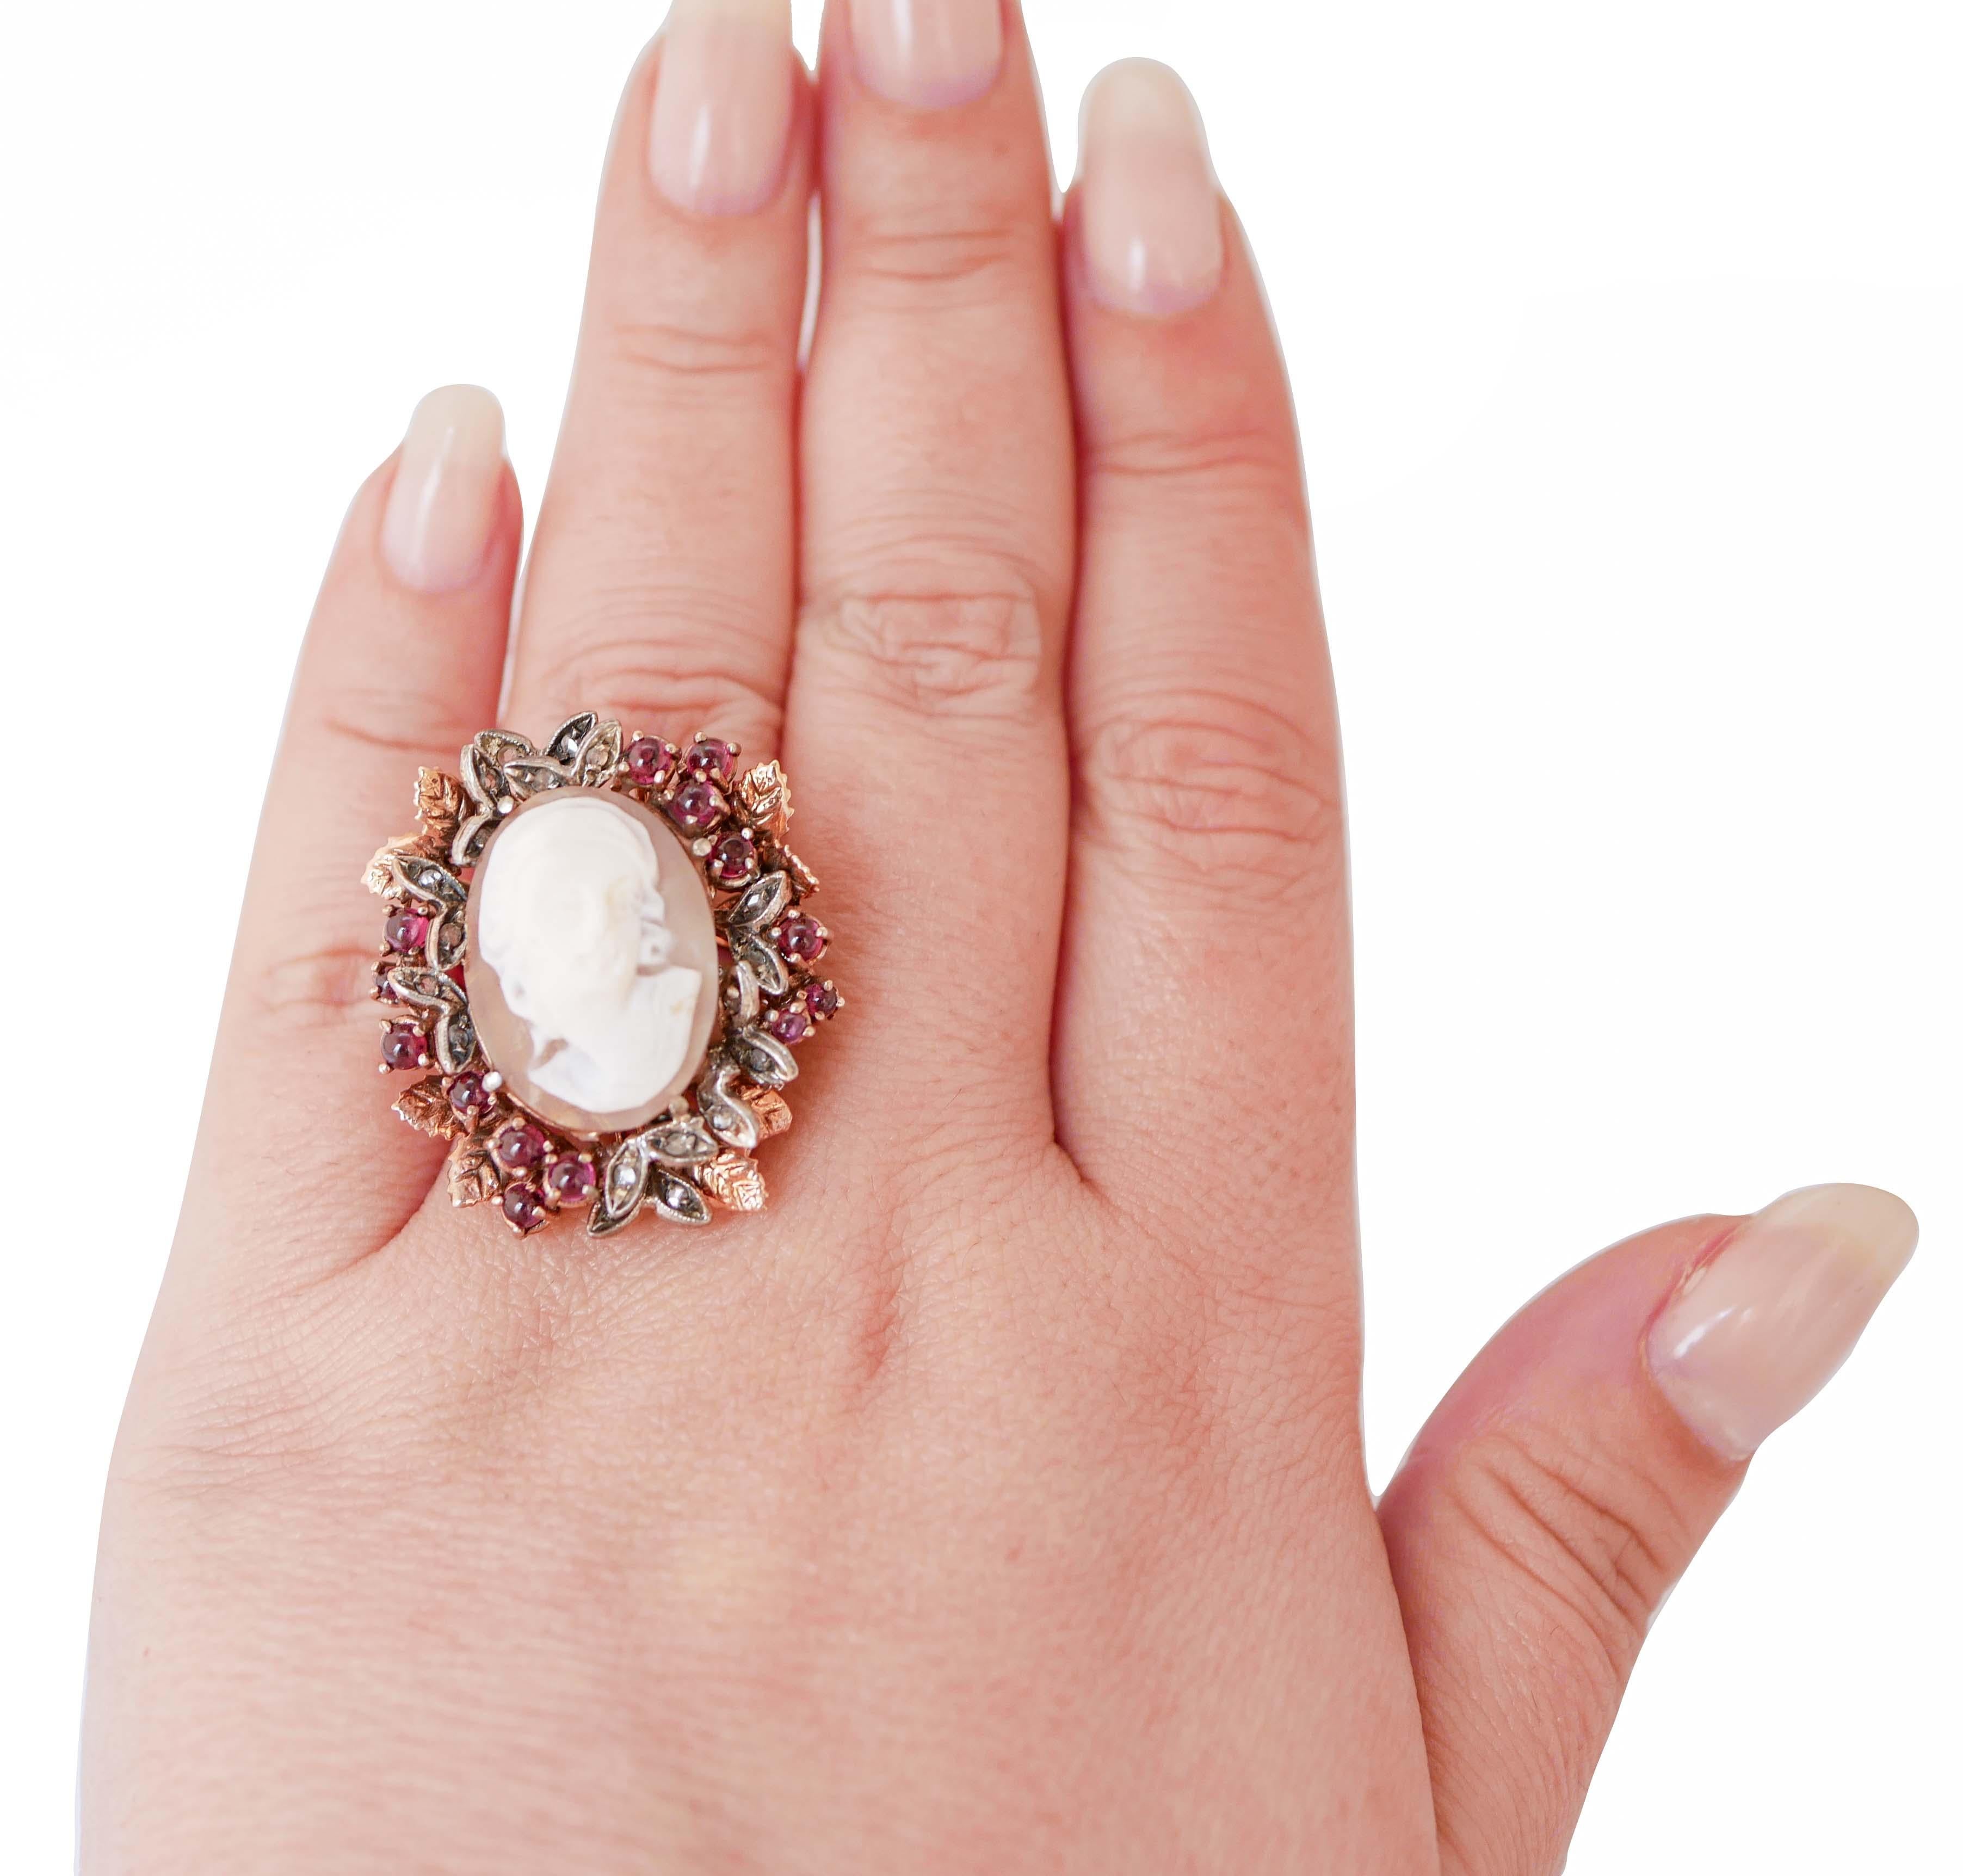 Mixed Cut Cameo, Diamonds, Garnets, Rose Gold and Silver Ring. For Sale